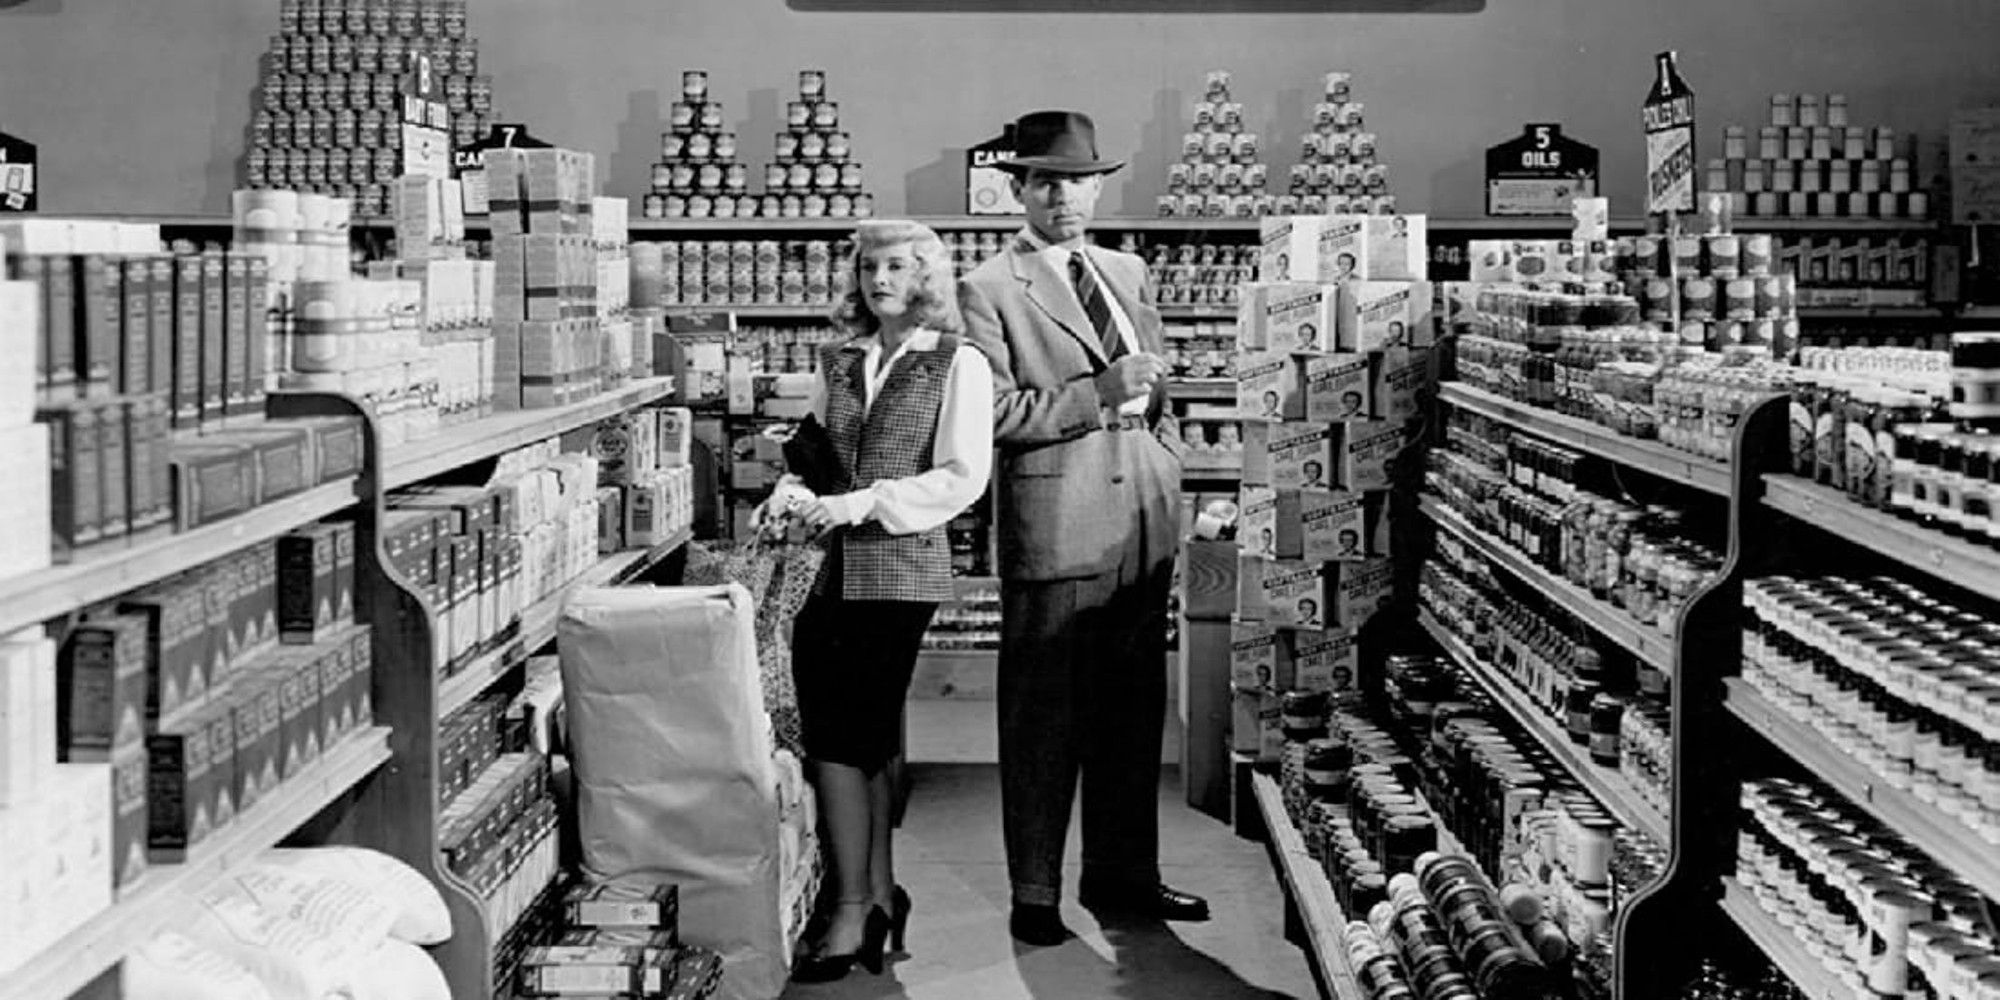 Phyllis and Walter rendevous at a grocery store in Double Indemnity